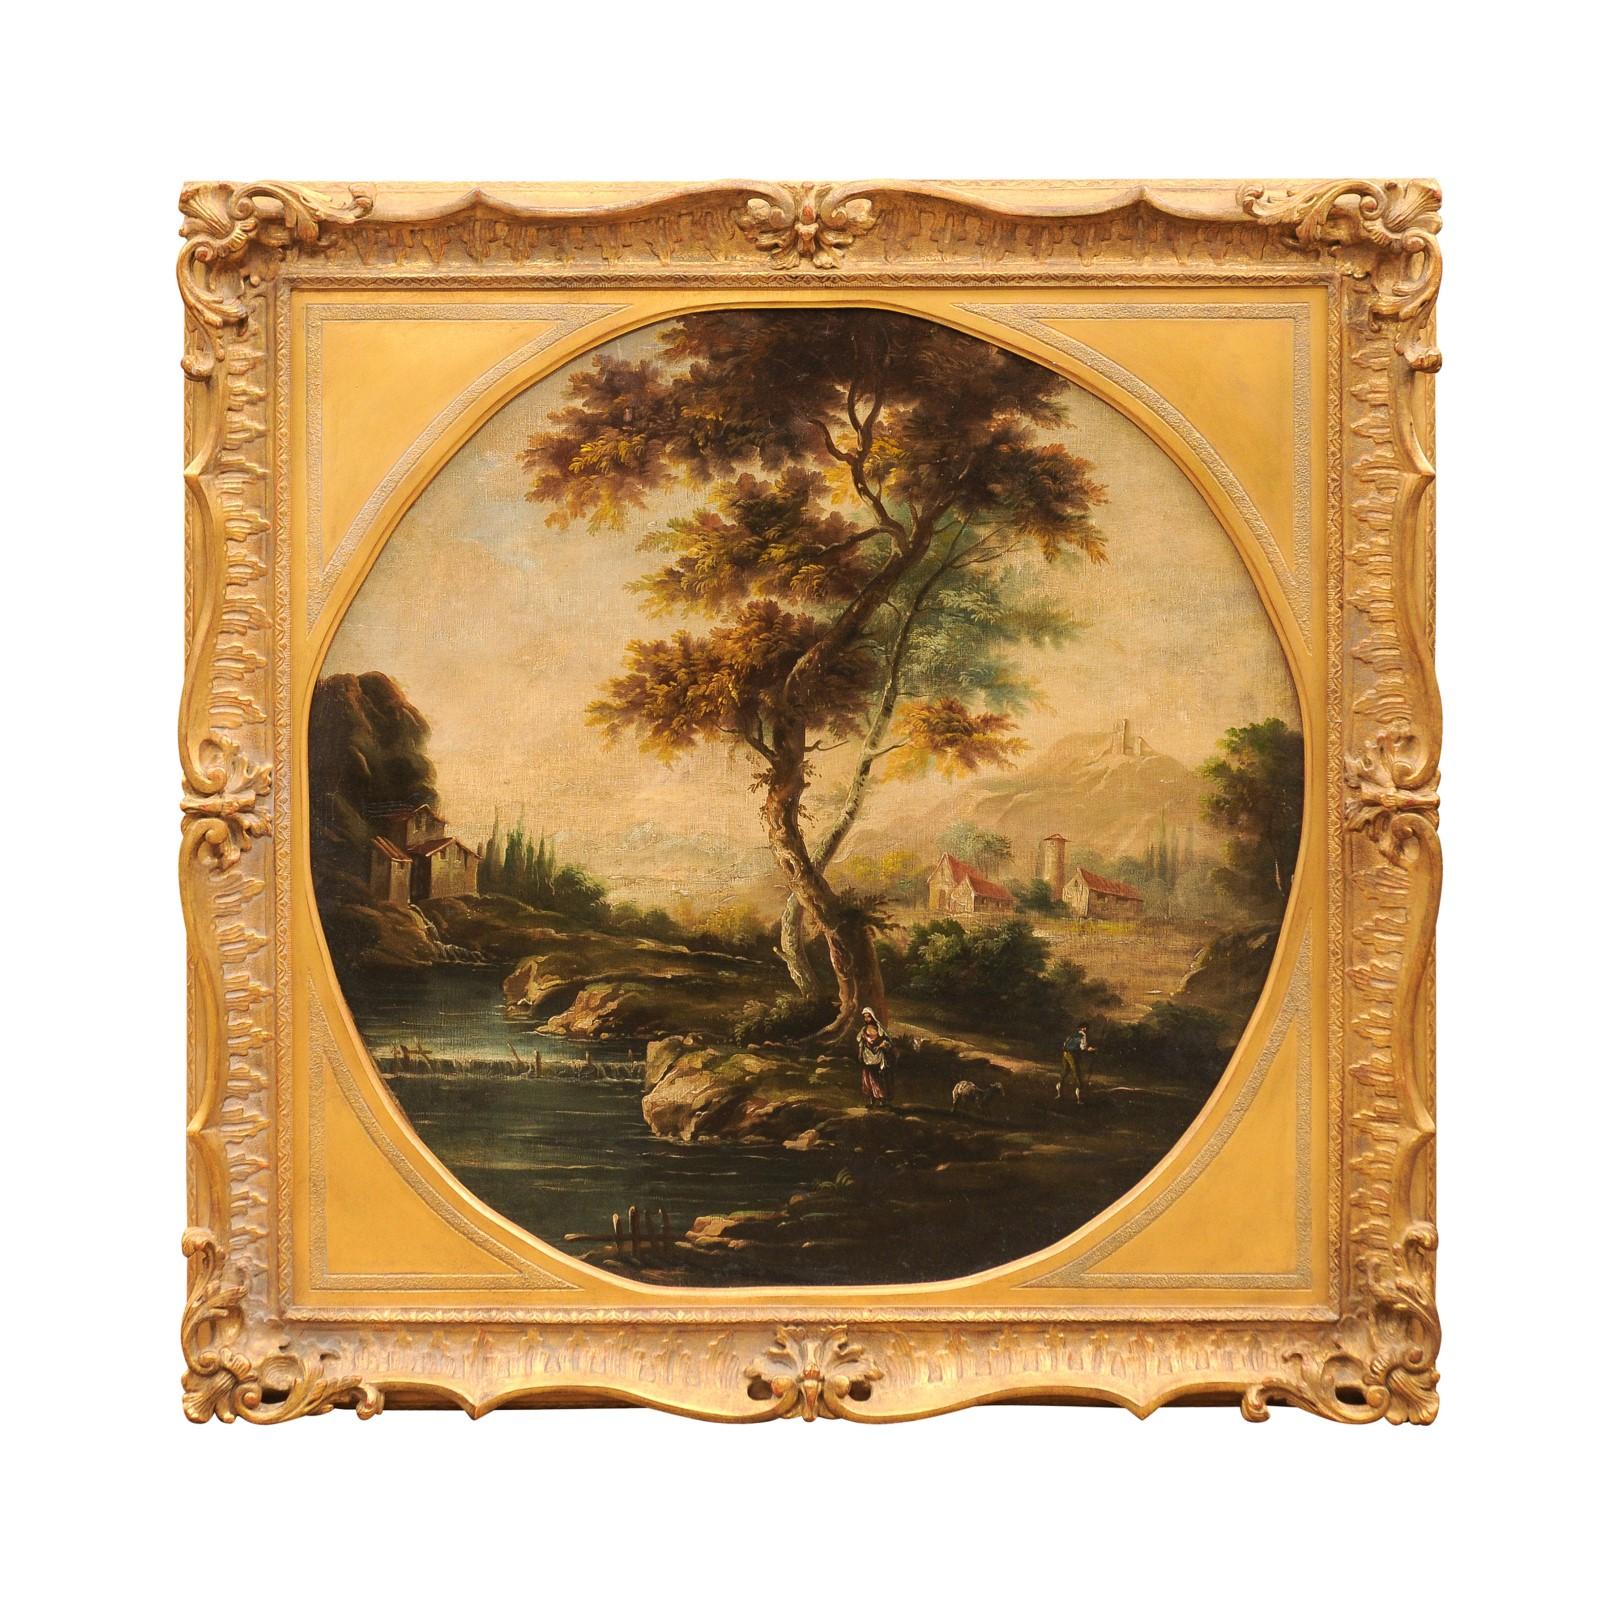 Large 19th Century English Oil on Canvas Landscape Painting in Gilt Frame In Good Condition For Sale In Atlanta, GA